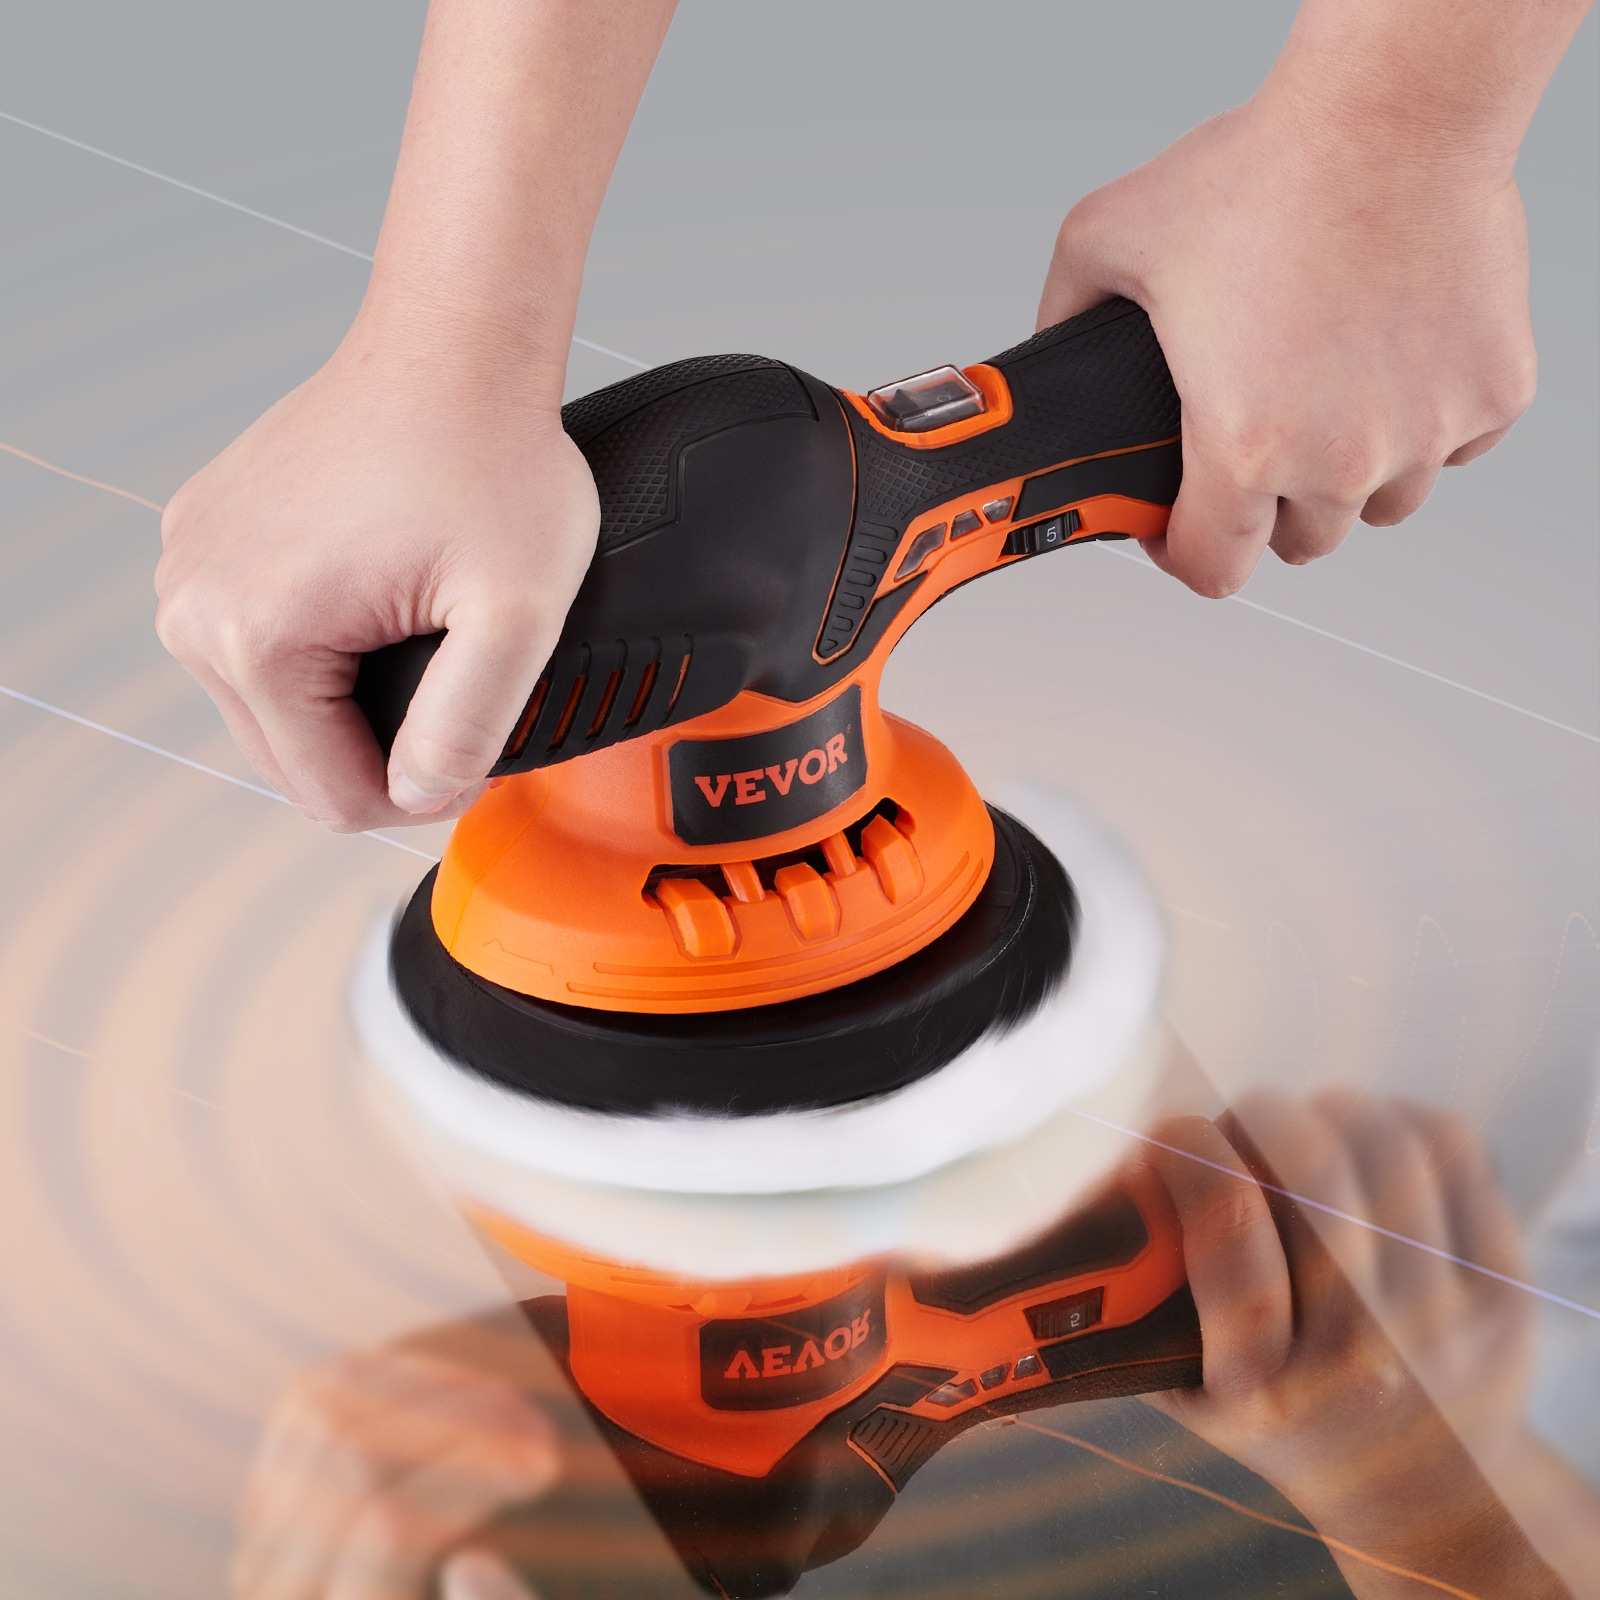 VEVOR 6-in Variable Speed Cordless Polisher in the Polishers